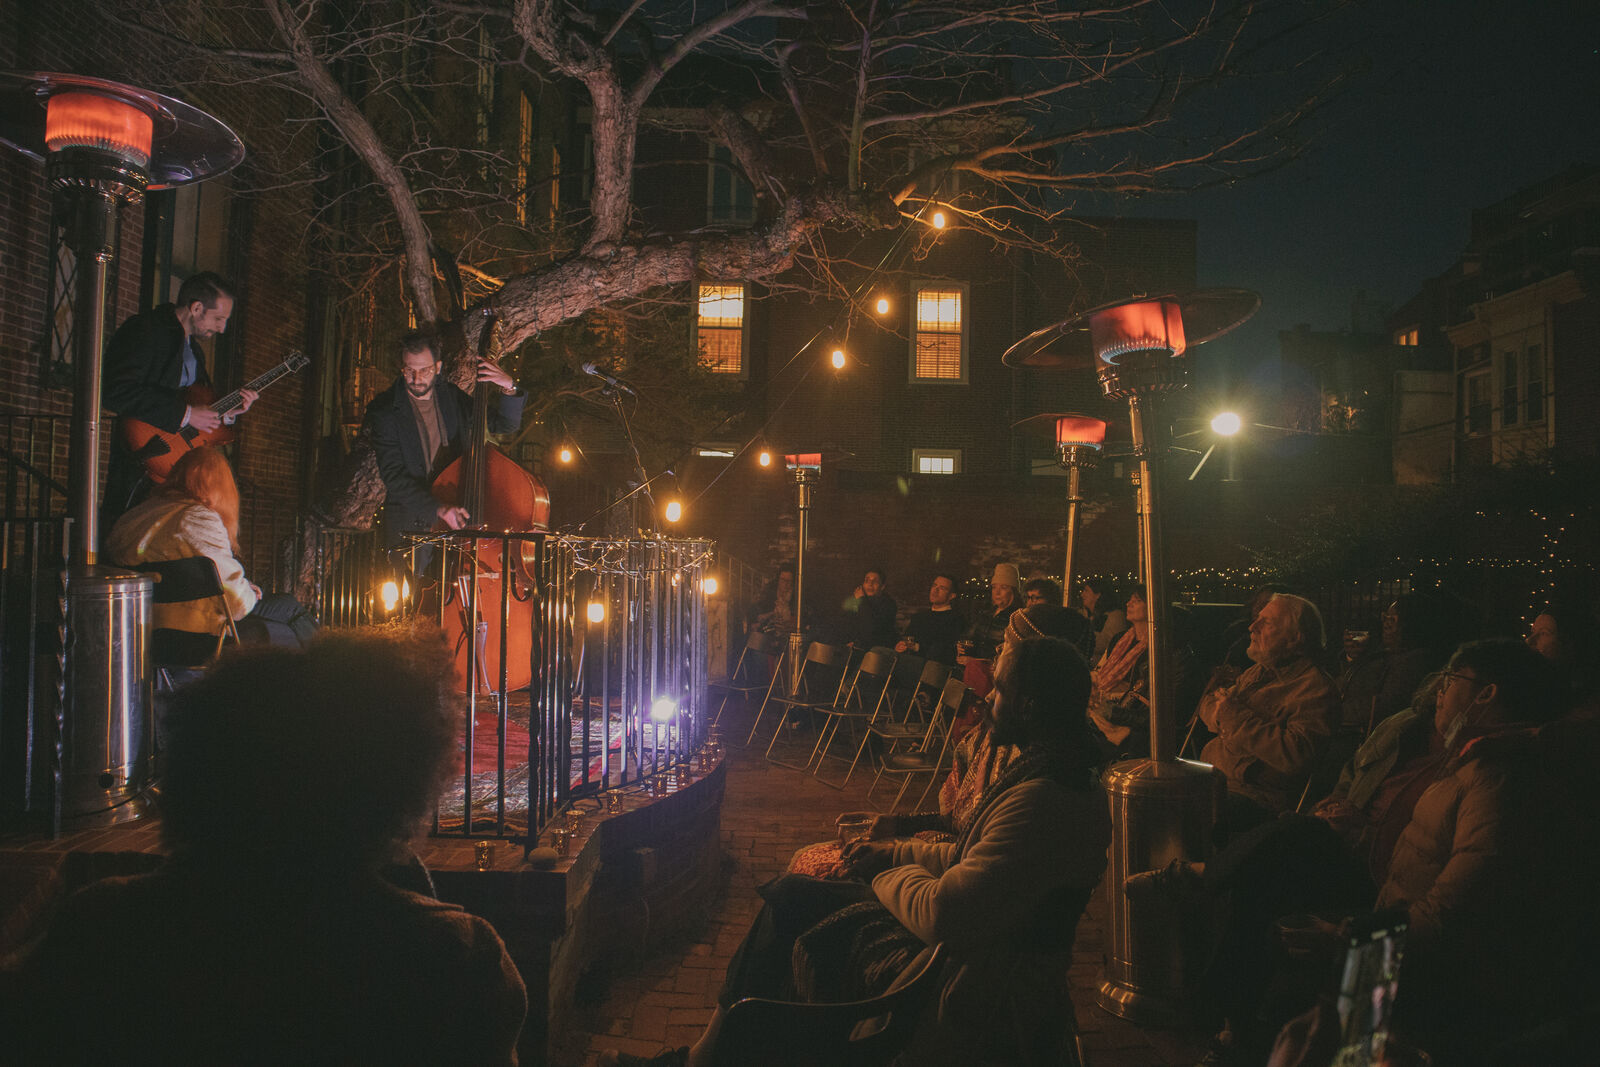 Set at night, on the left musicians perform on top of an elevated stoop surrounded by heat lamps. On the right the crowd looks on, bathed in a warm orange light.